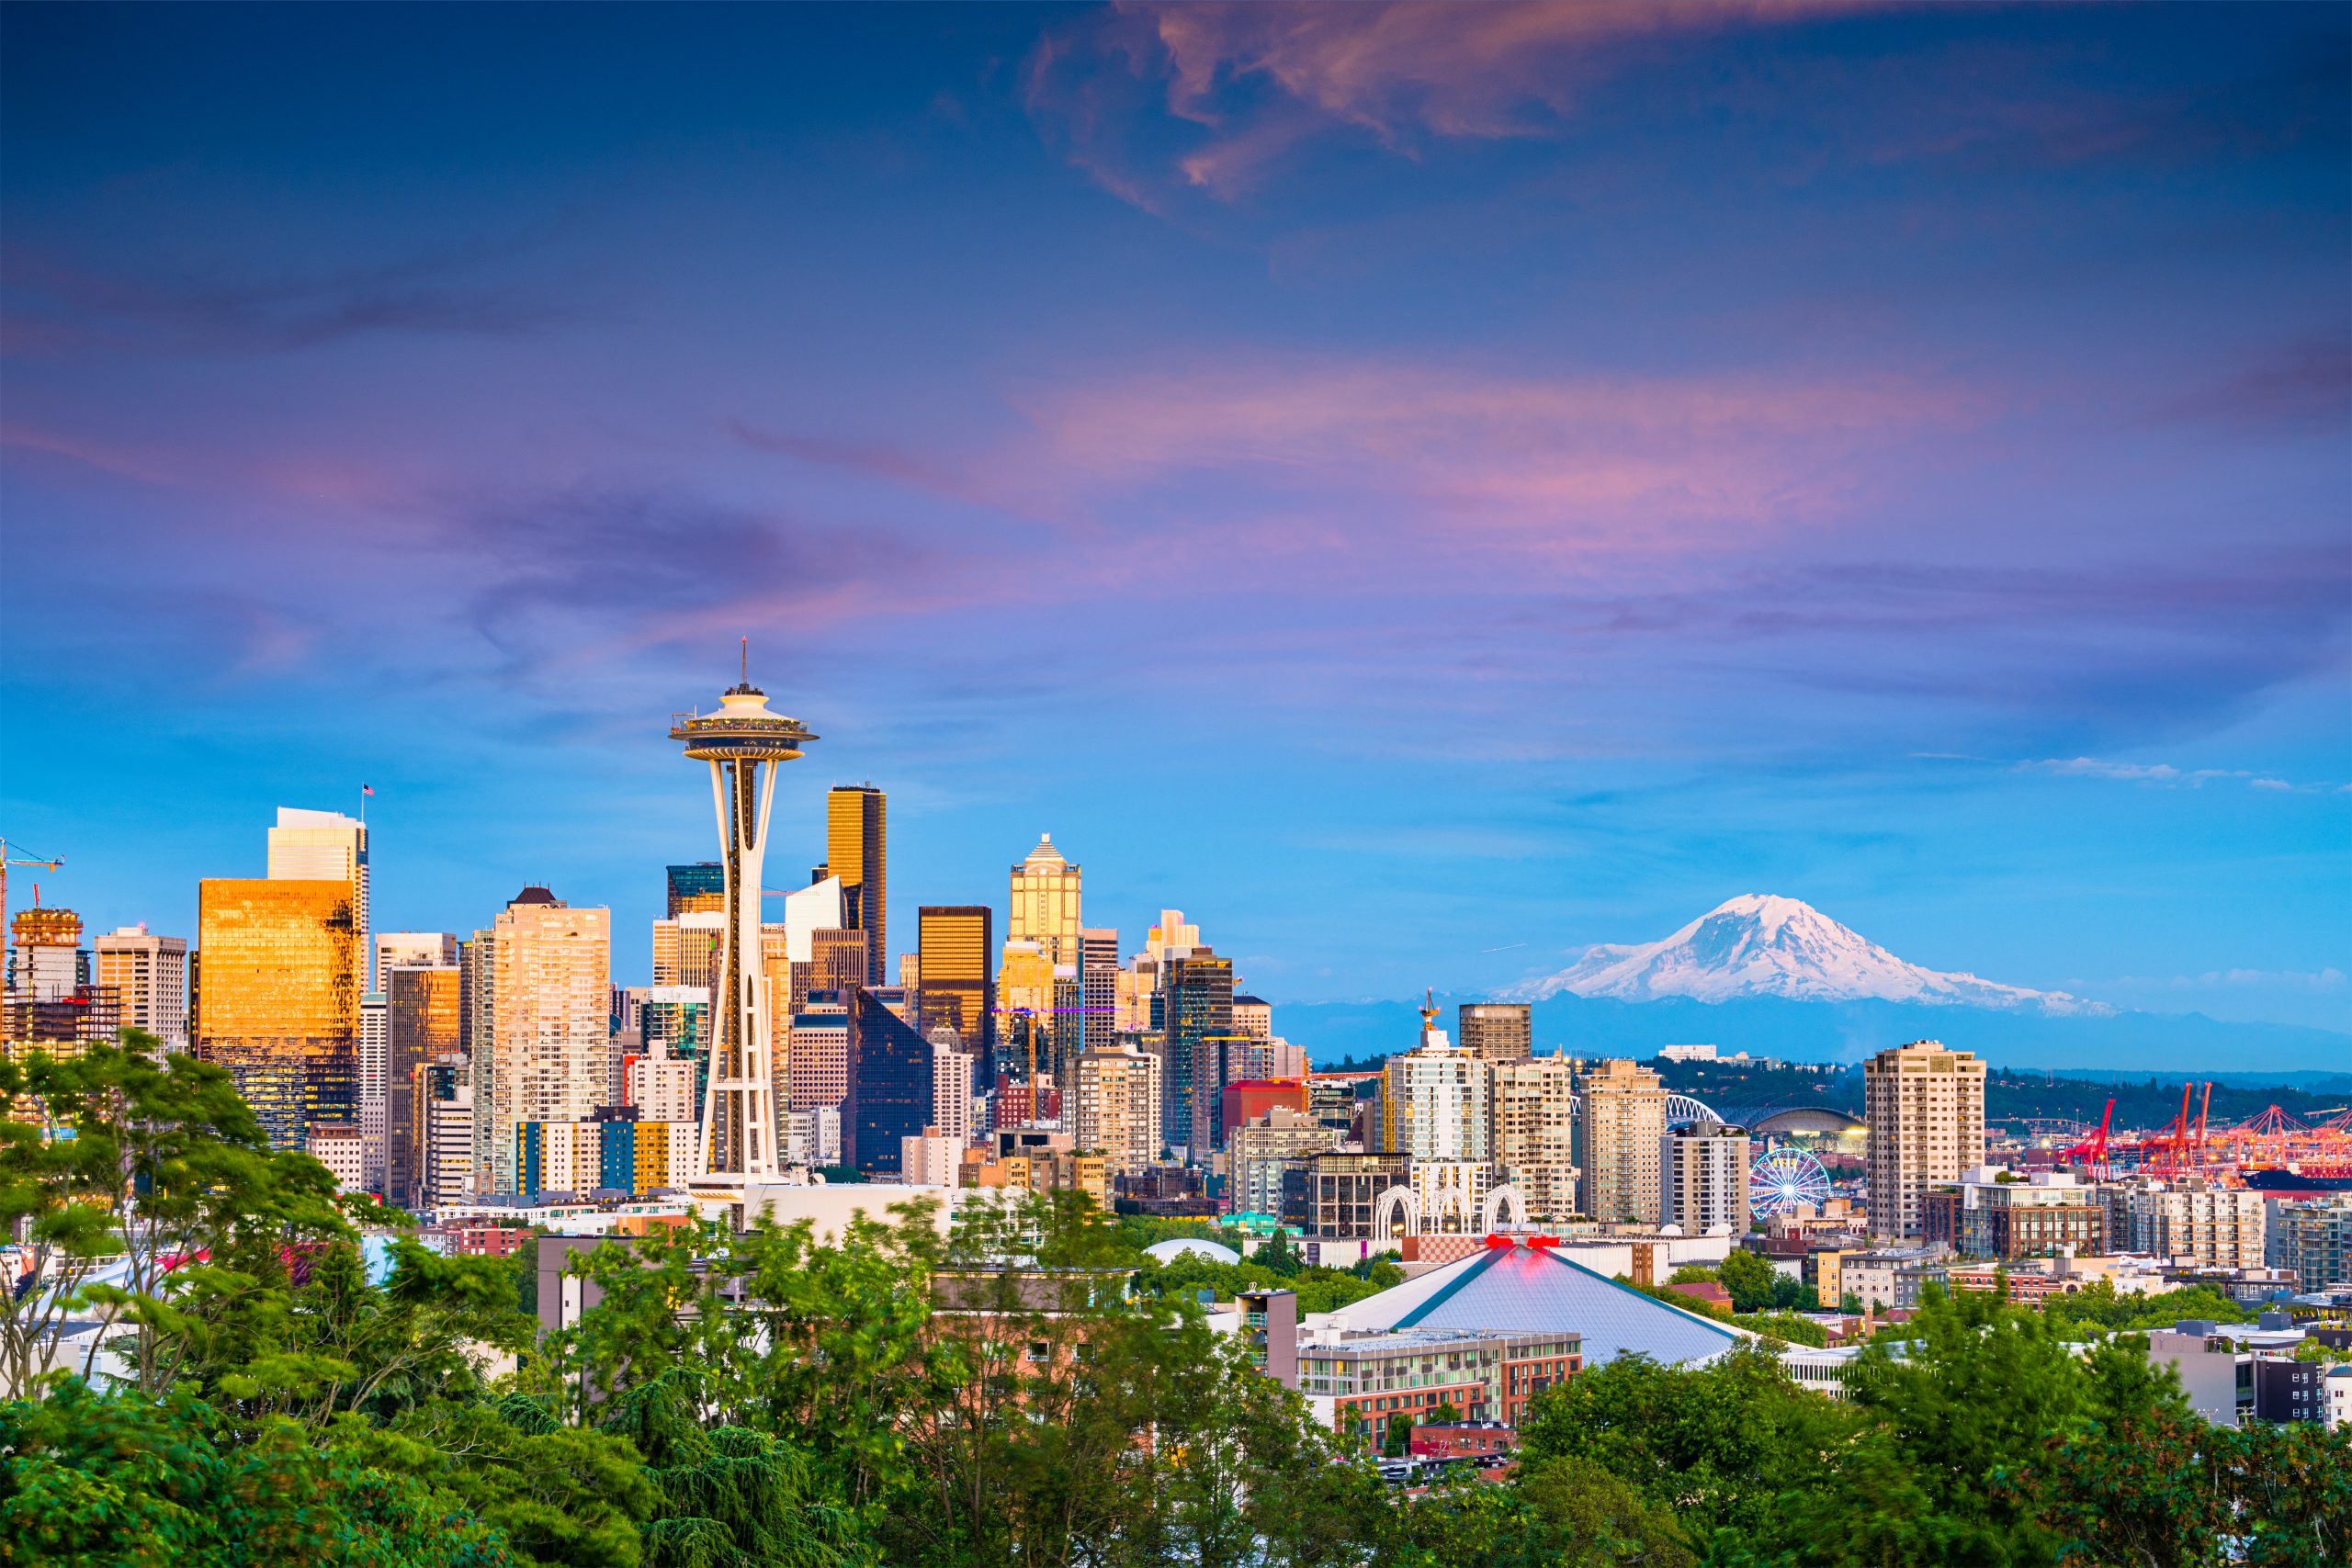 aapc-supports-member-growth-and-success-in-seattle-aapc-knowledge-center